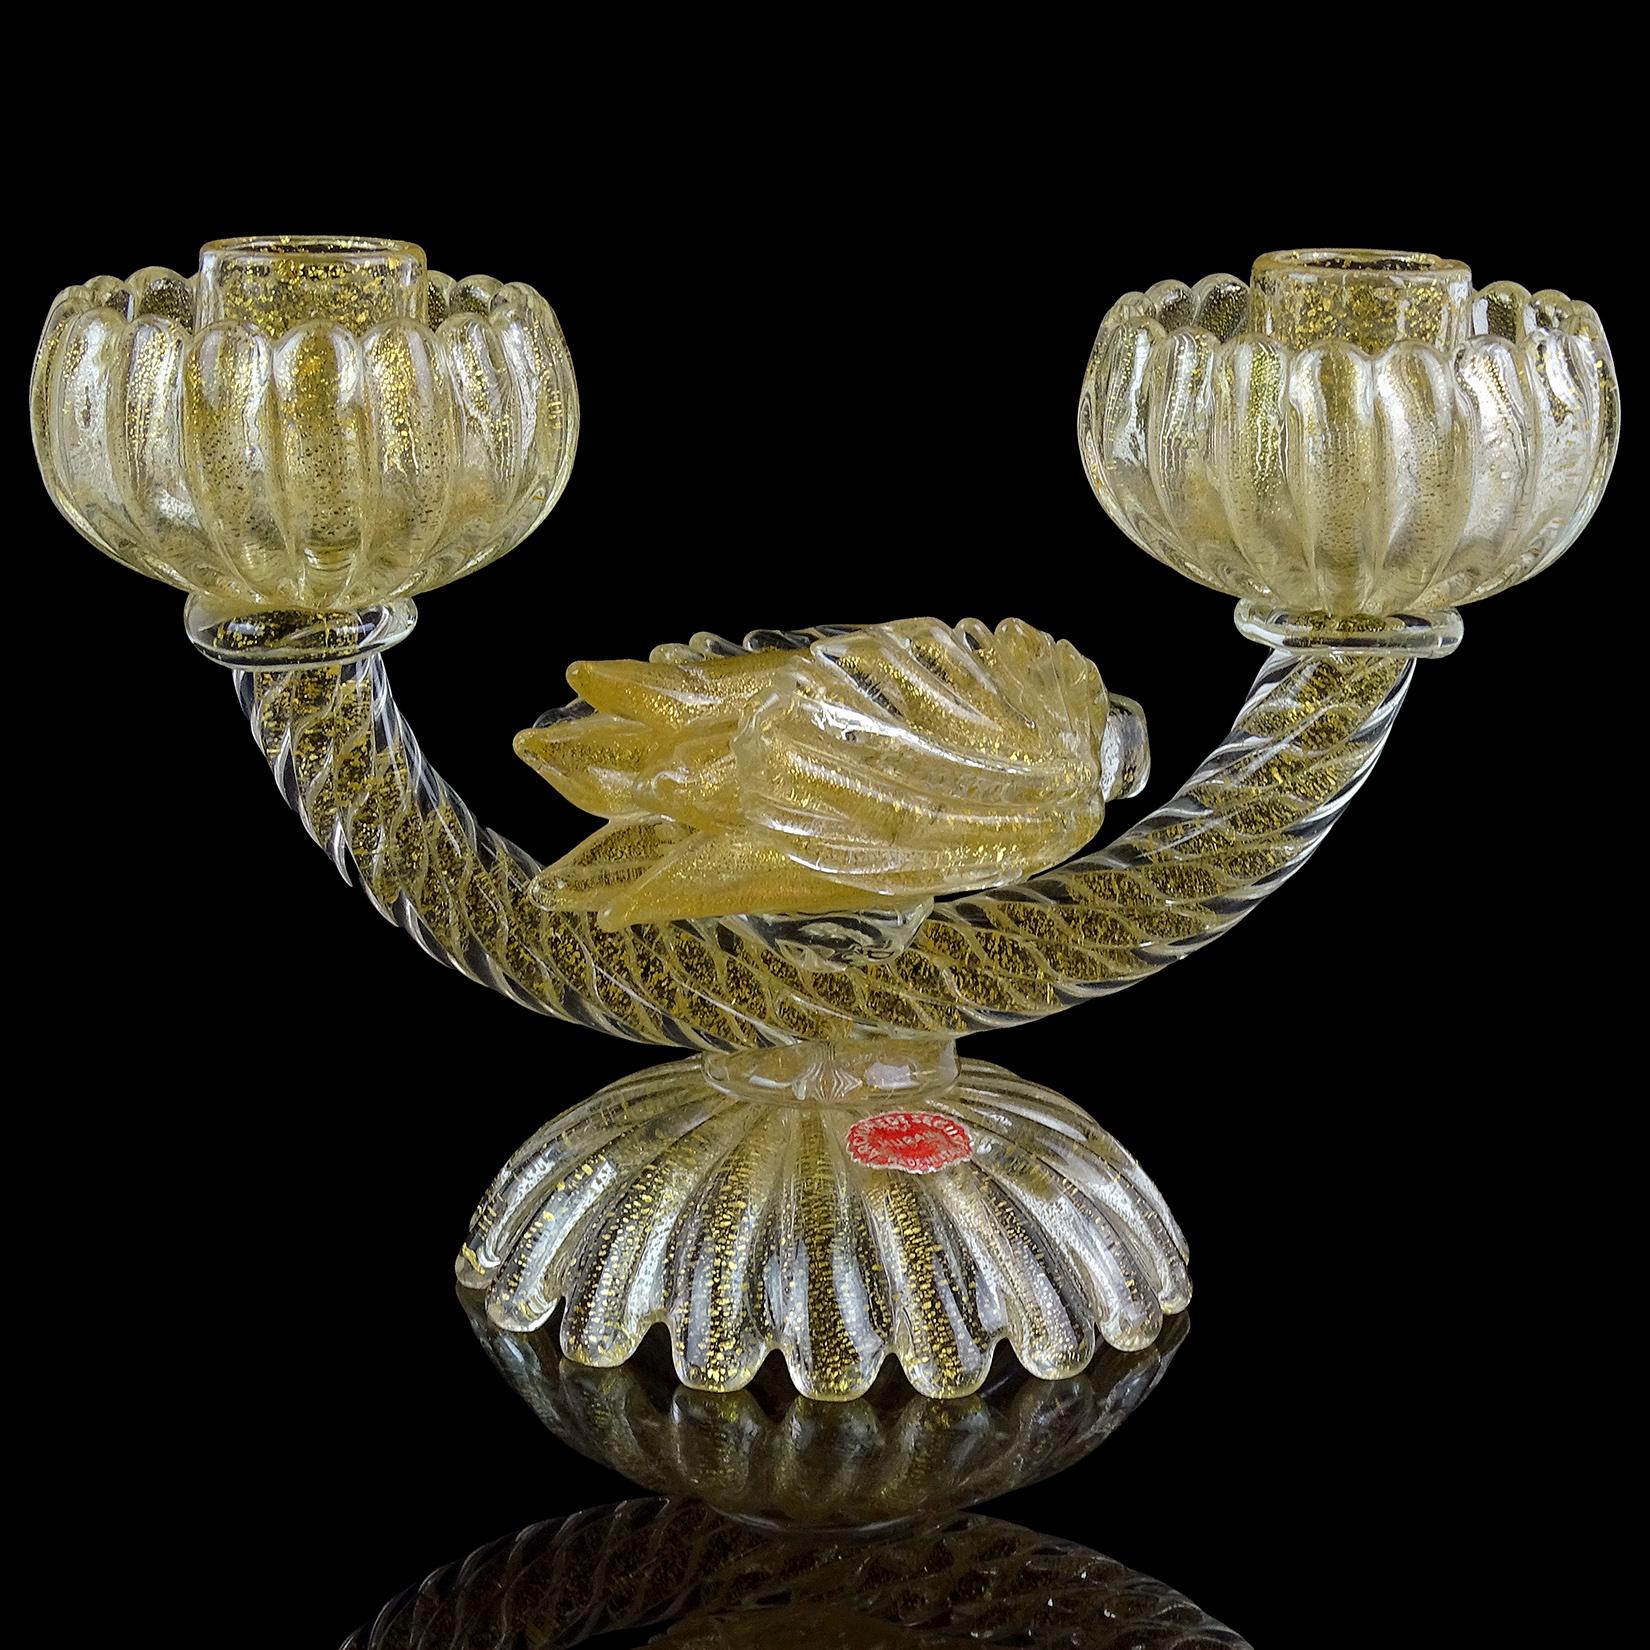 Beautiful vintage Murano hand blown gold flecks with attached flower Italian art glass double candlestick. Documented to designer Archimede Seguso, circa 1950s. It has 2 original labels still attached to the top and bottom of the piece. A large